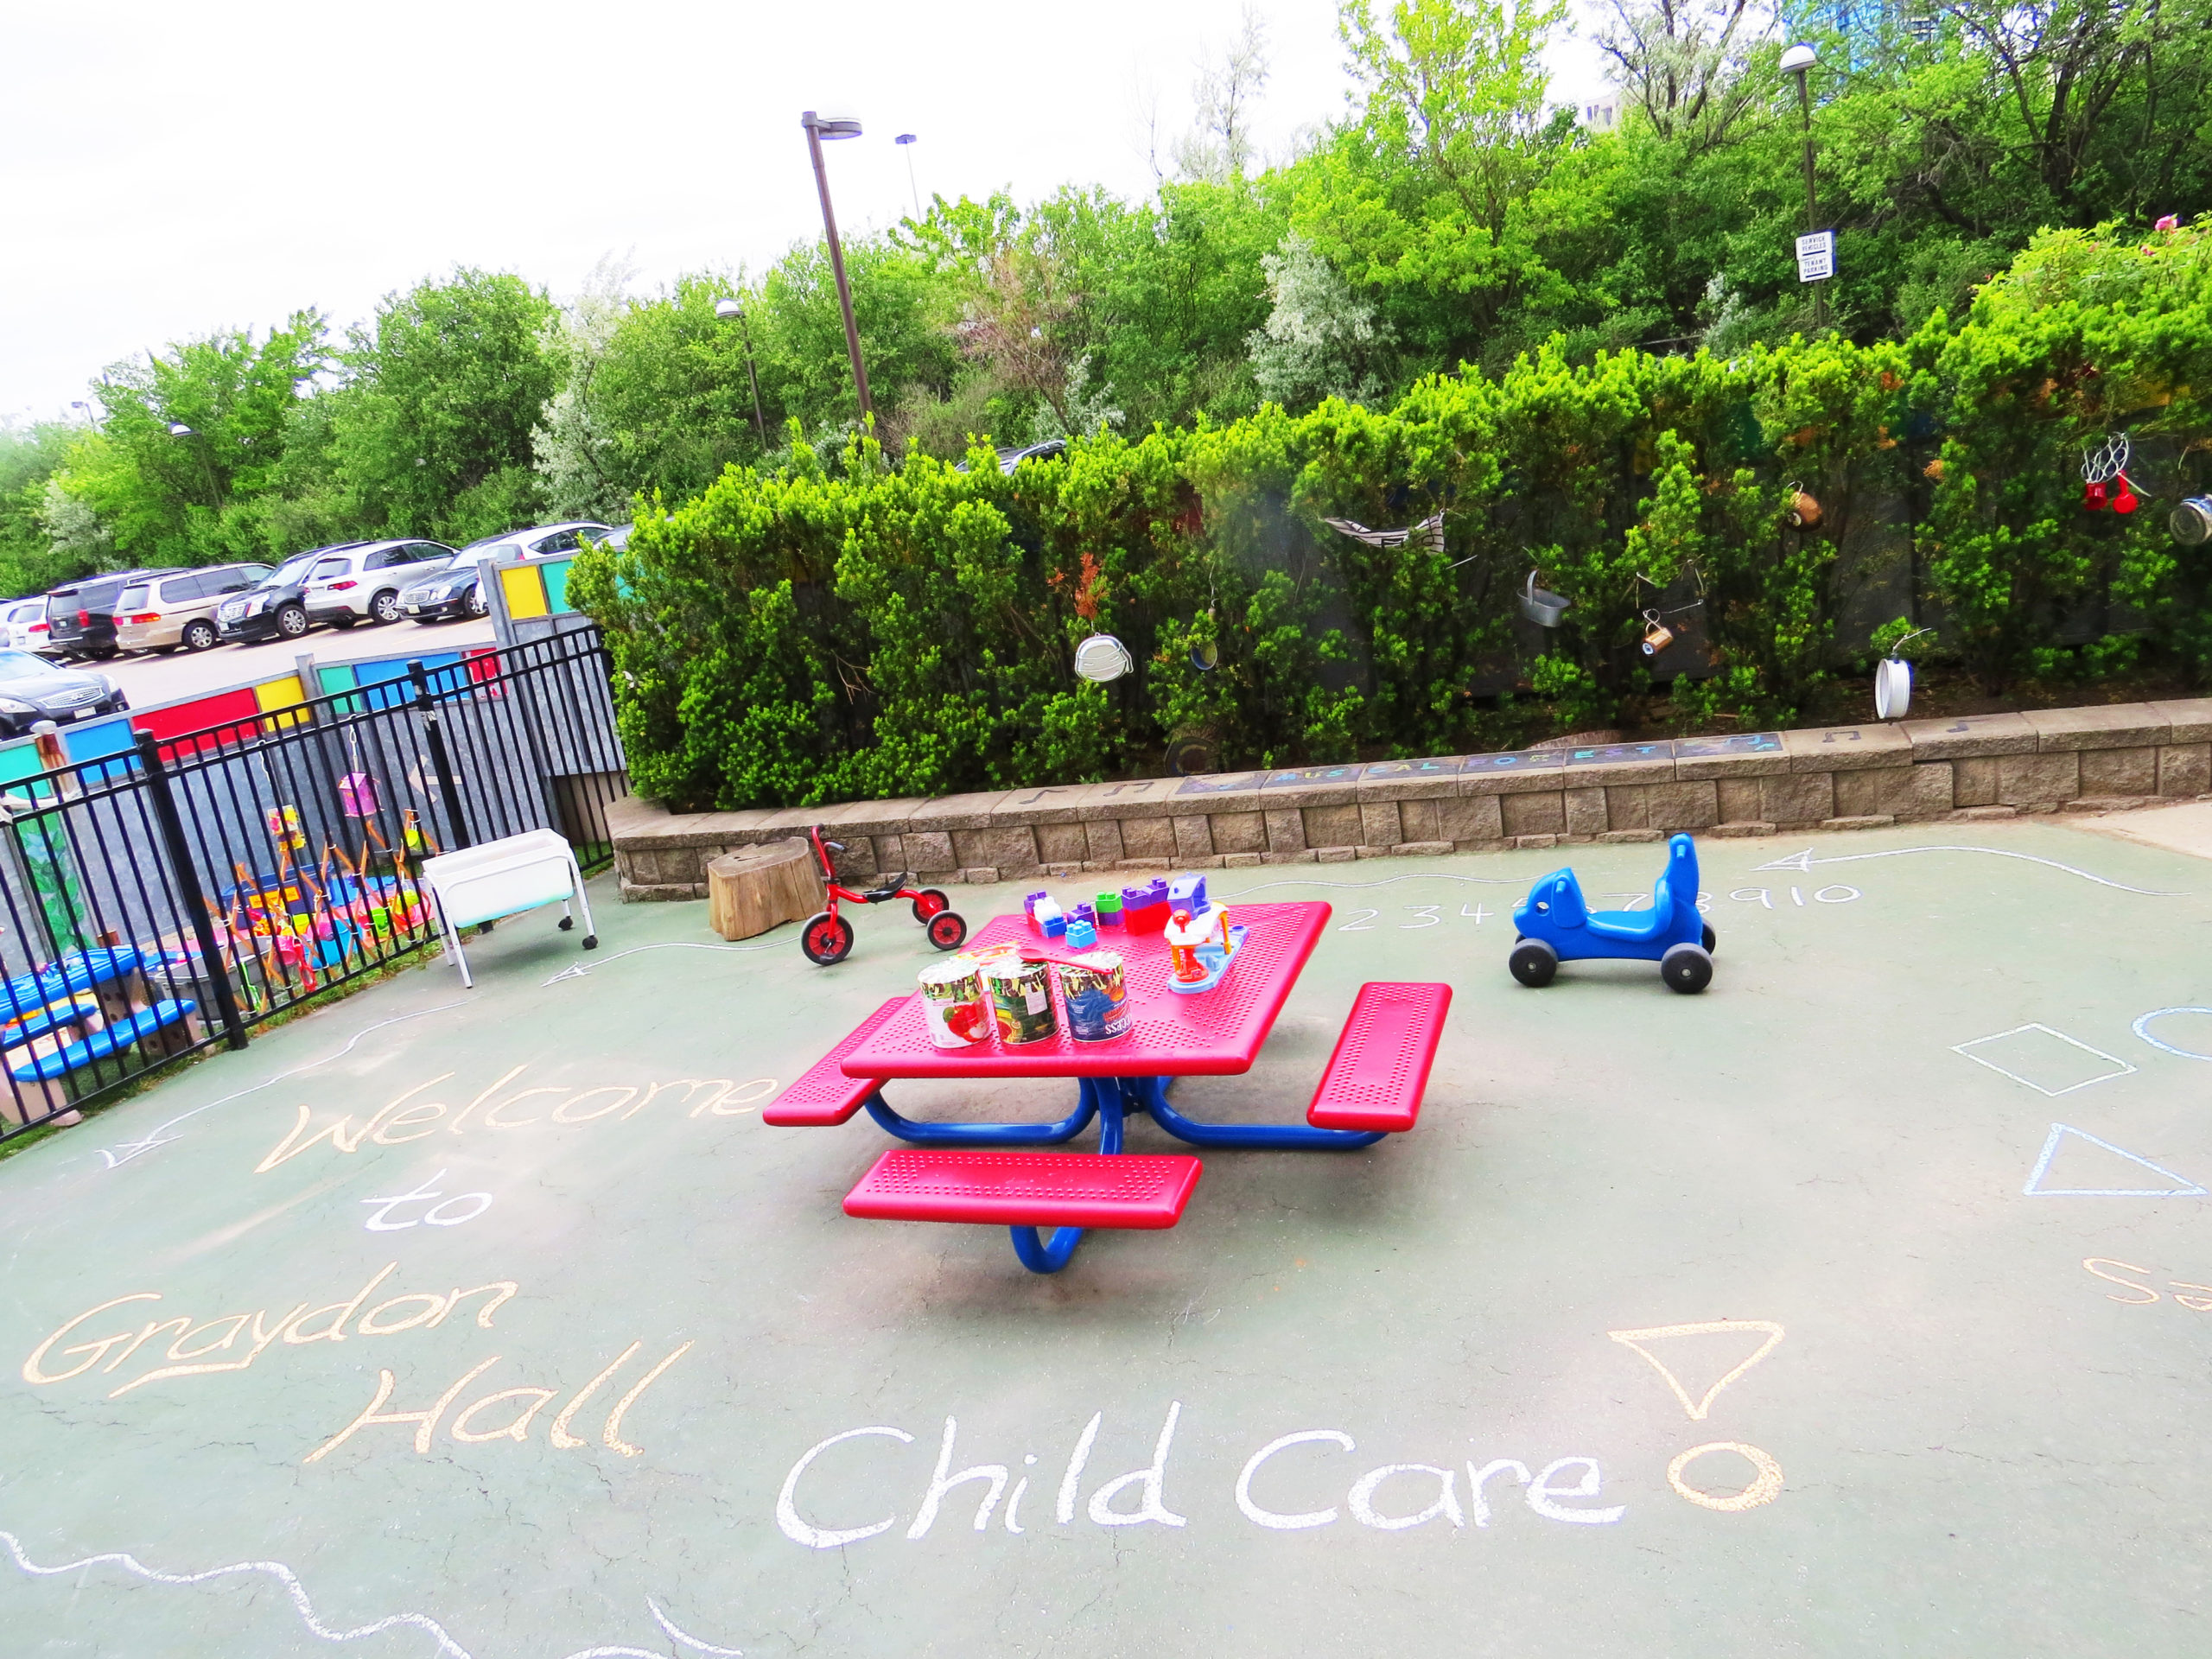 Read more about the article Graydon Hall Child Care Services